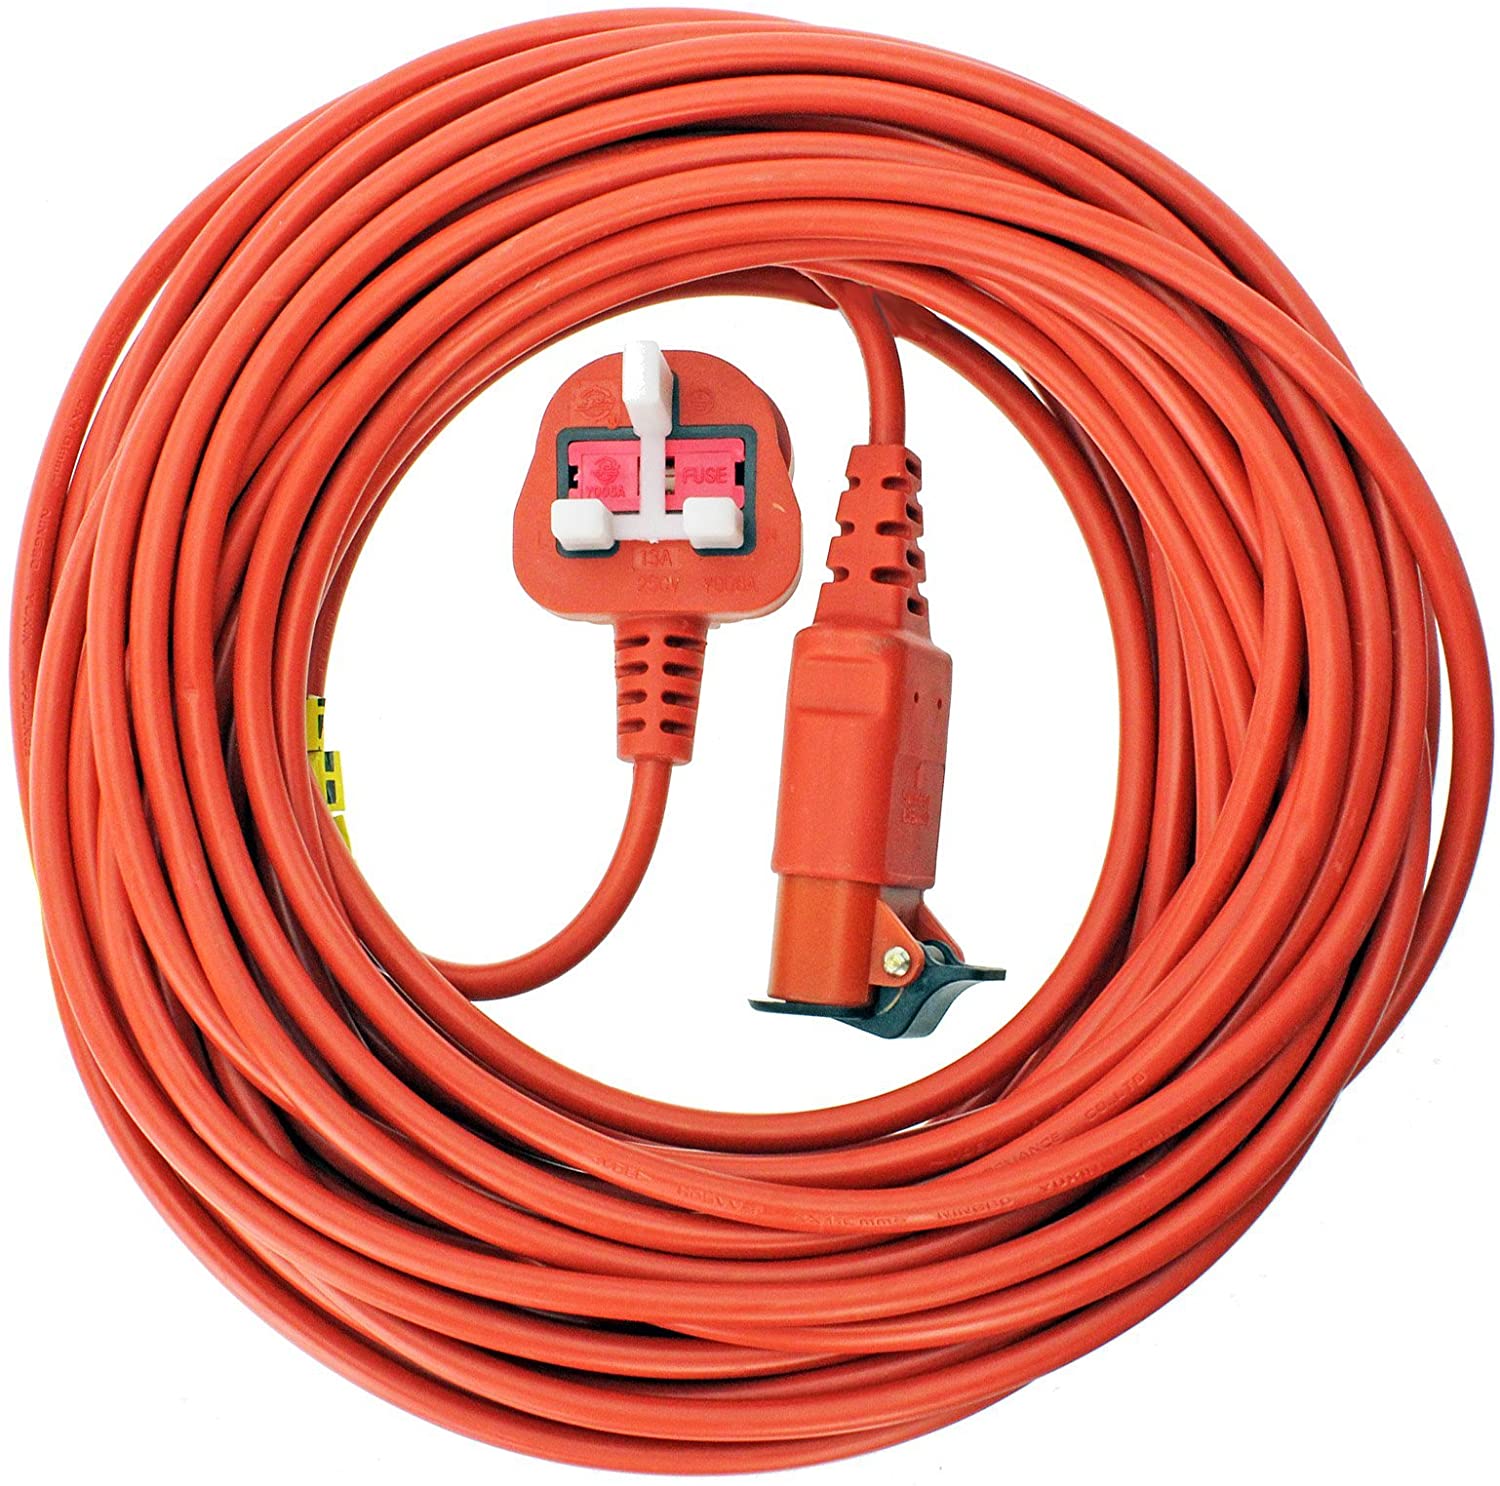 20m Orange Cable for Flymo / Bosch Lawnmower